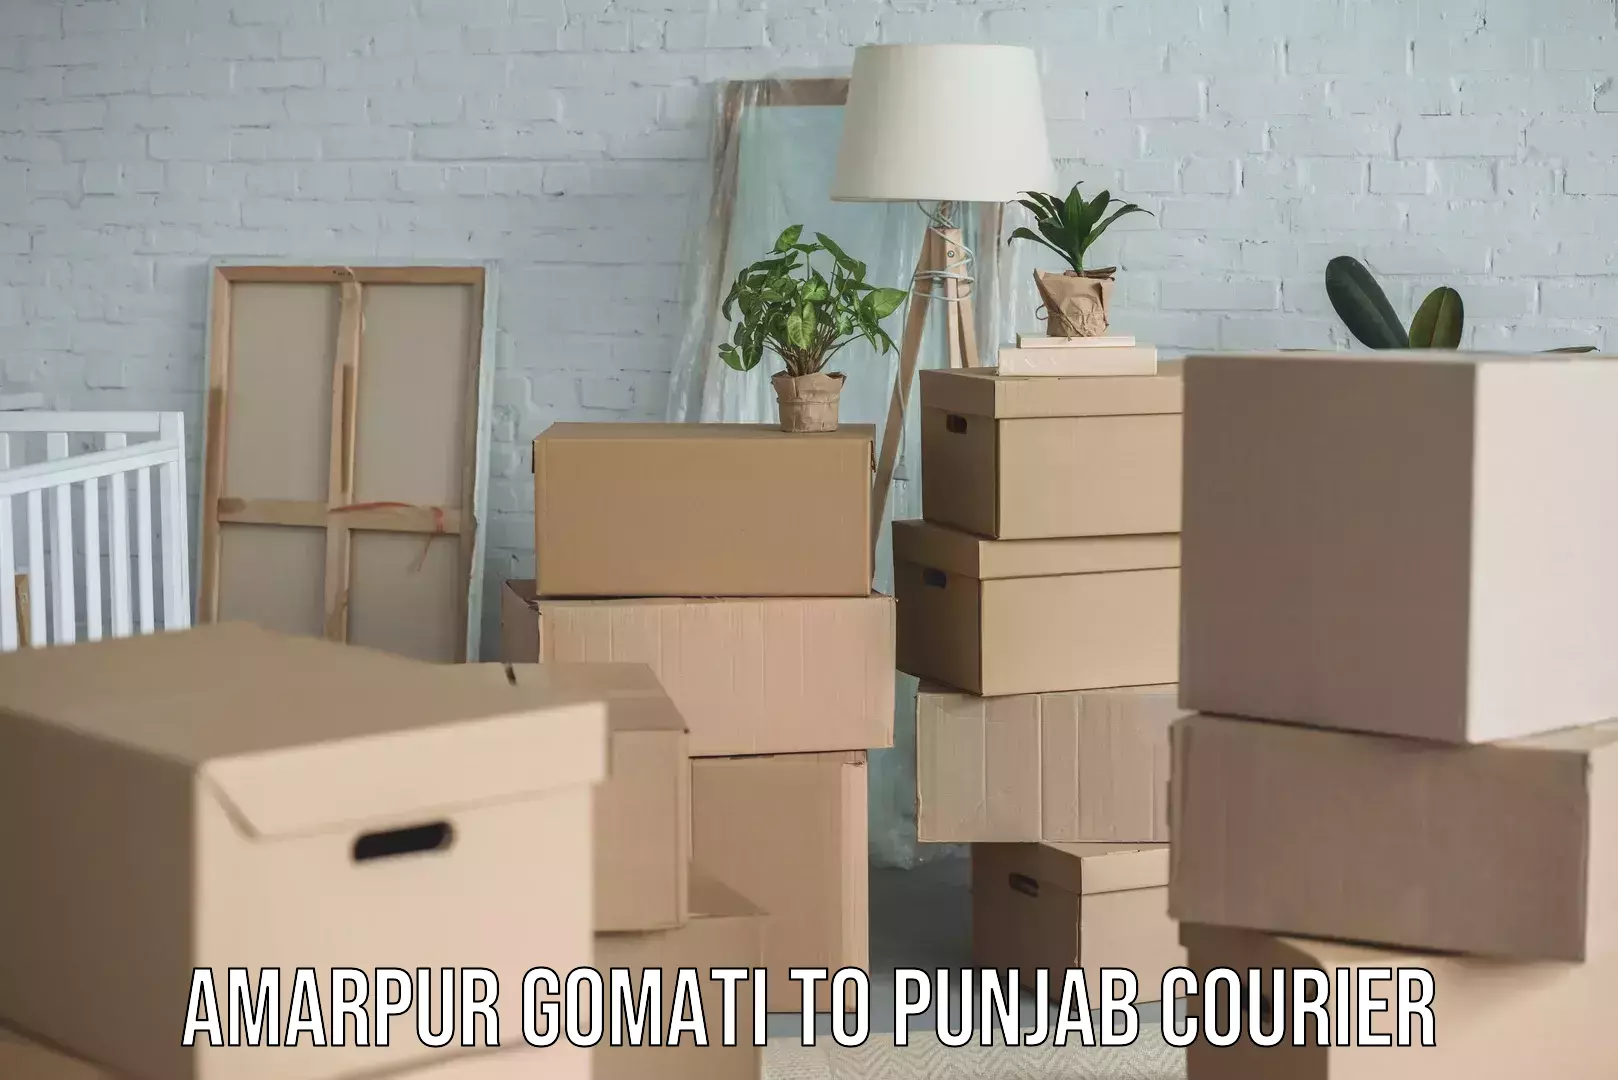 Rural area delivery in Amarpur Gomati to Punjab